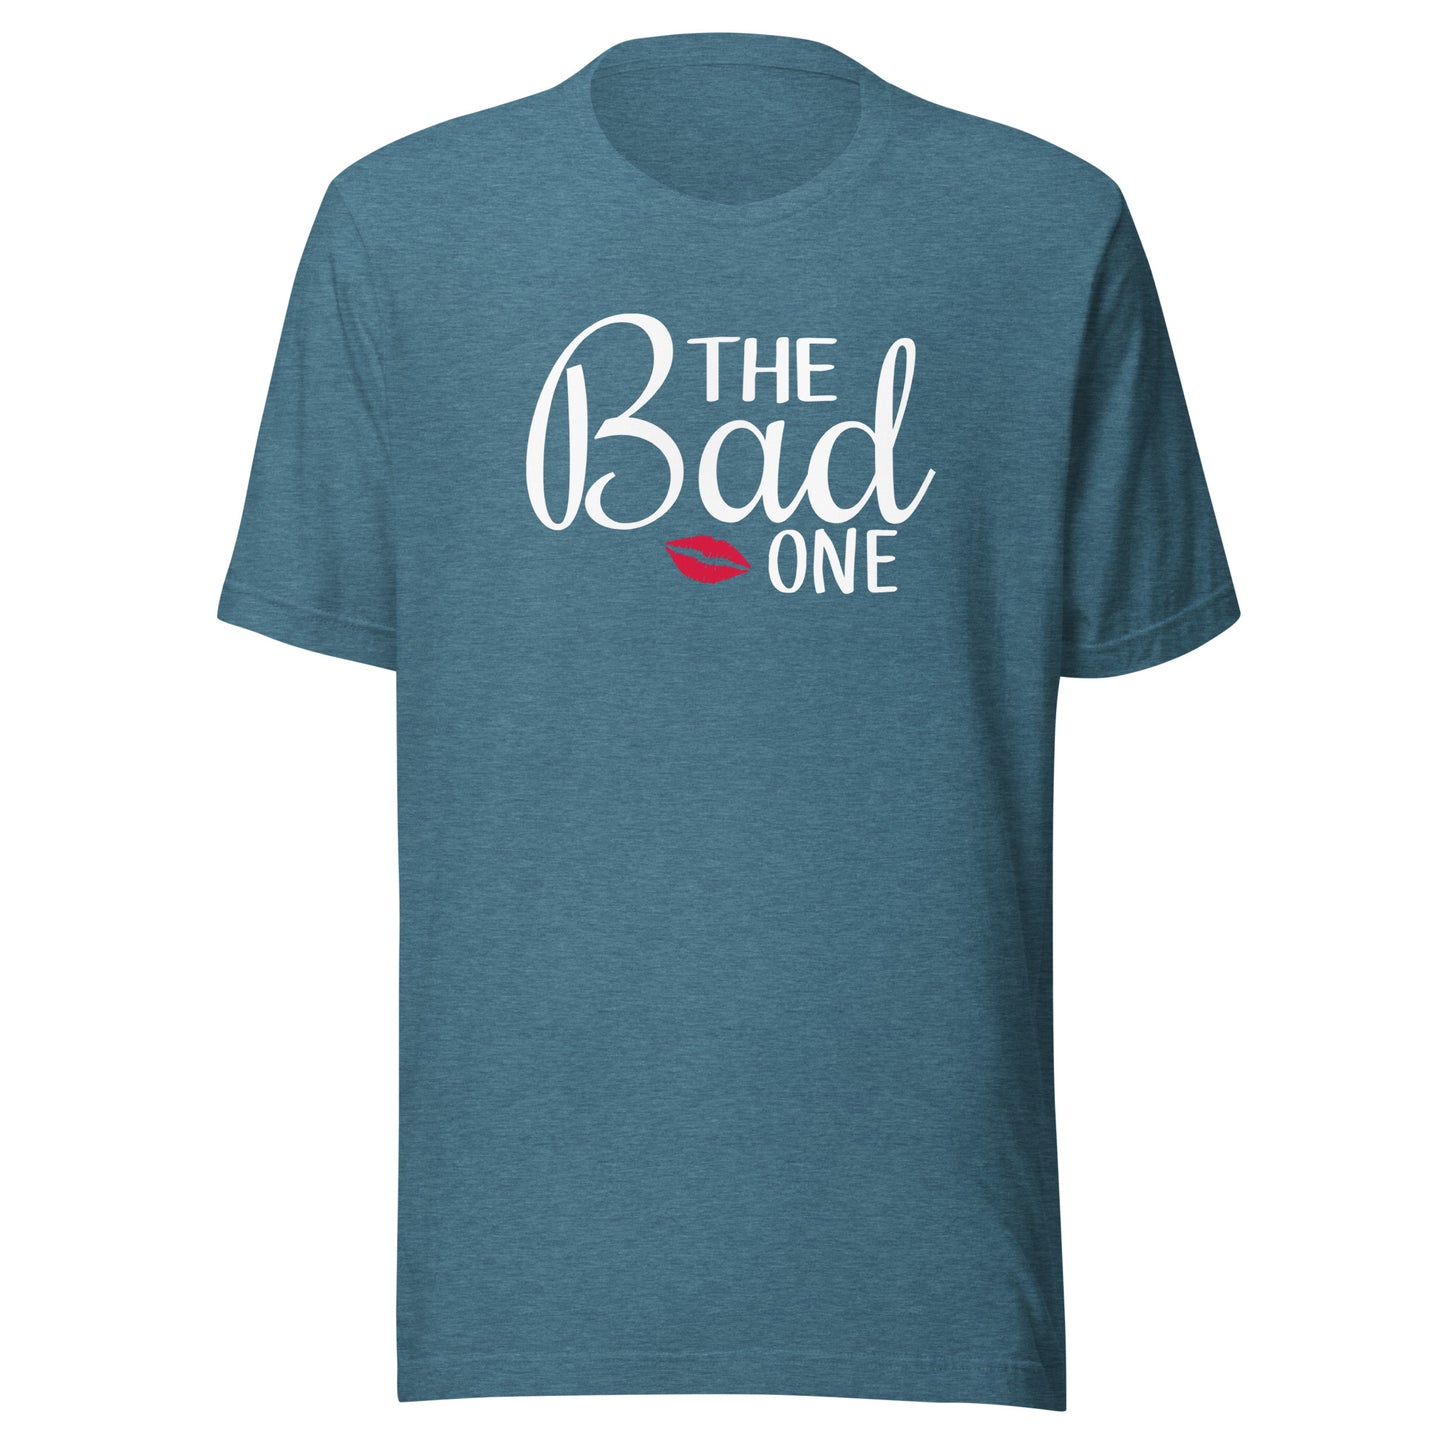 Large - XL The Bad One (white letters)